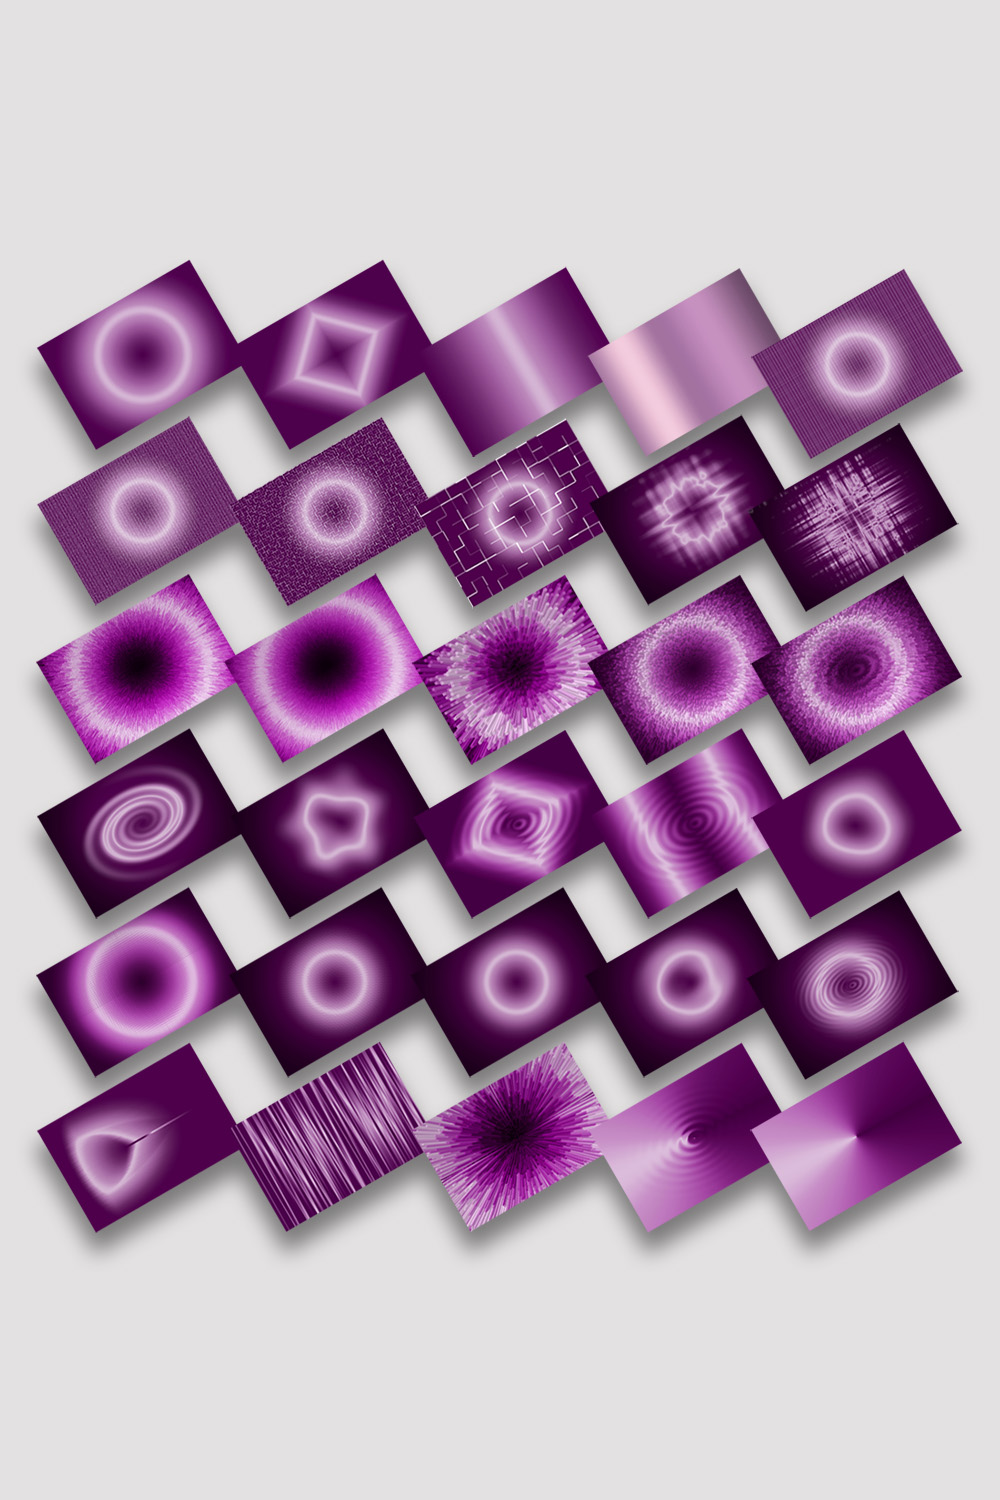 30 Pcs high quality abstract purple colored glowing gradient background designs for designs and illustrations pinterest preview image.